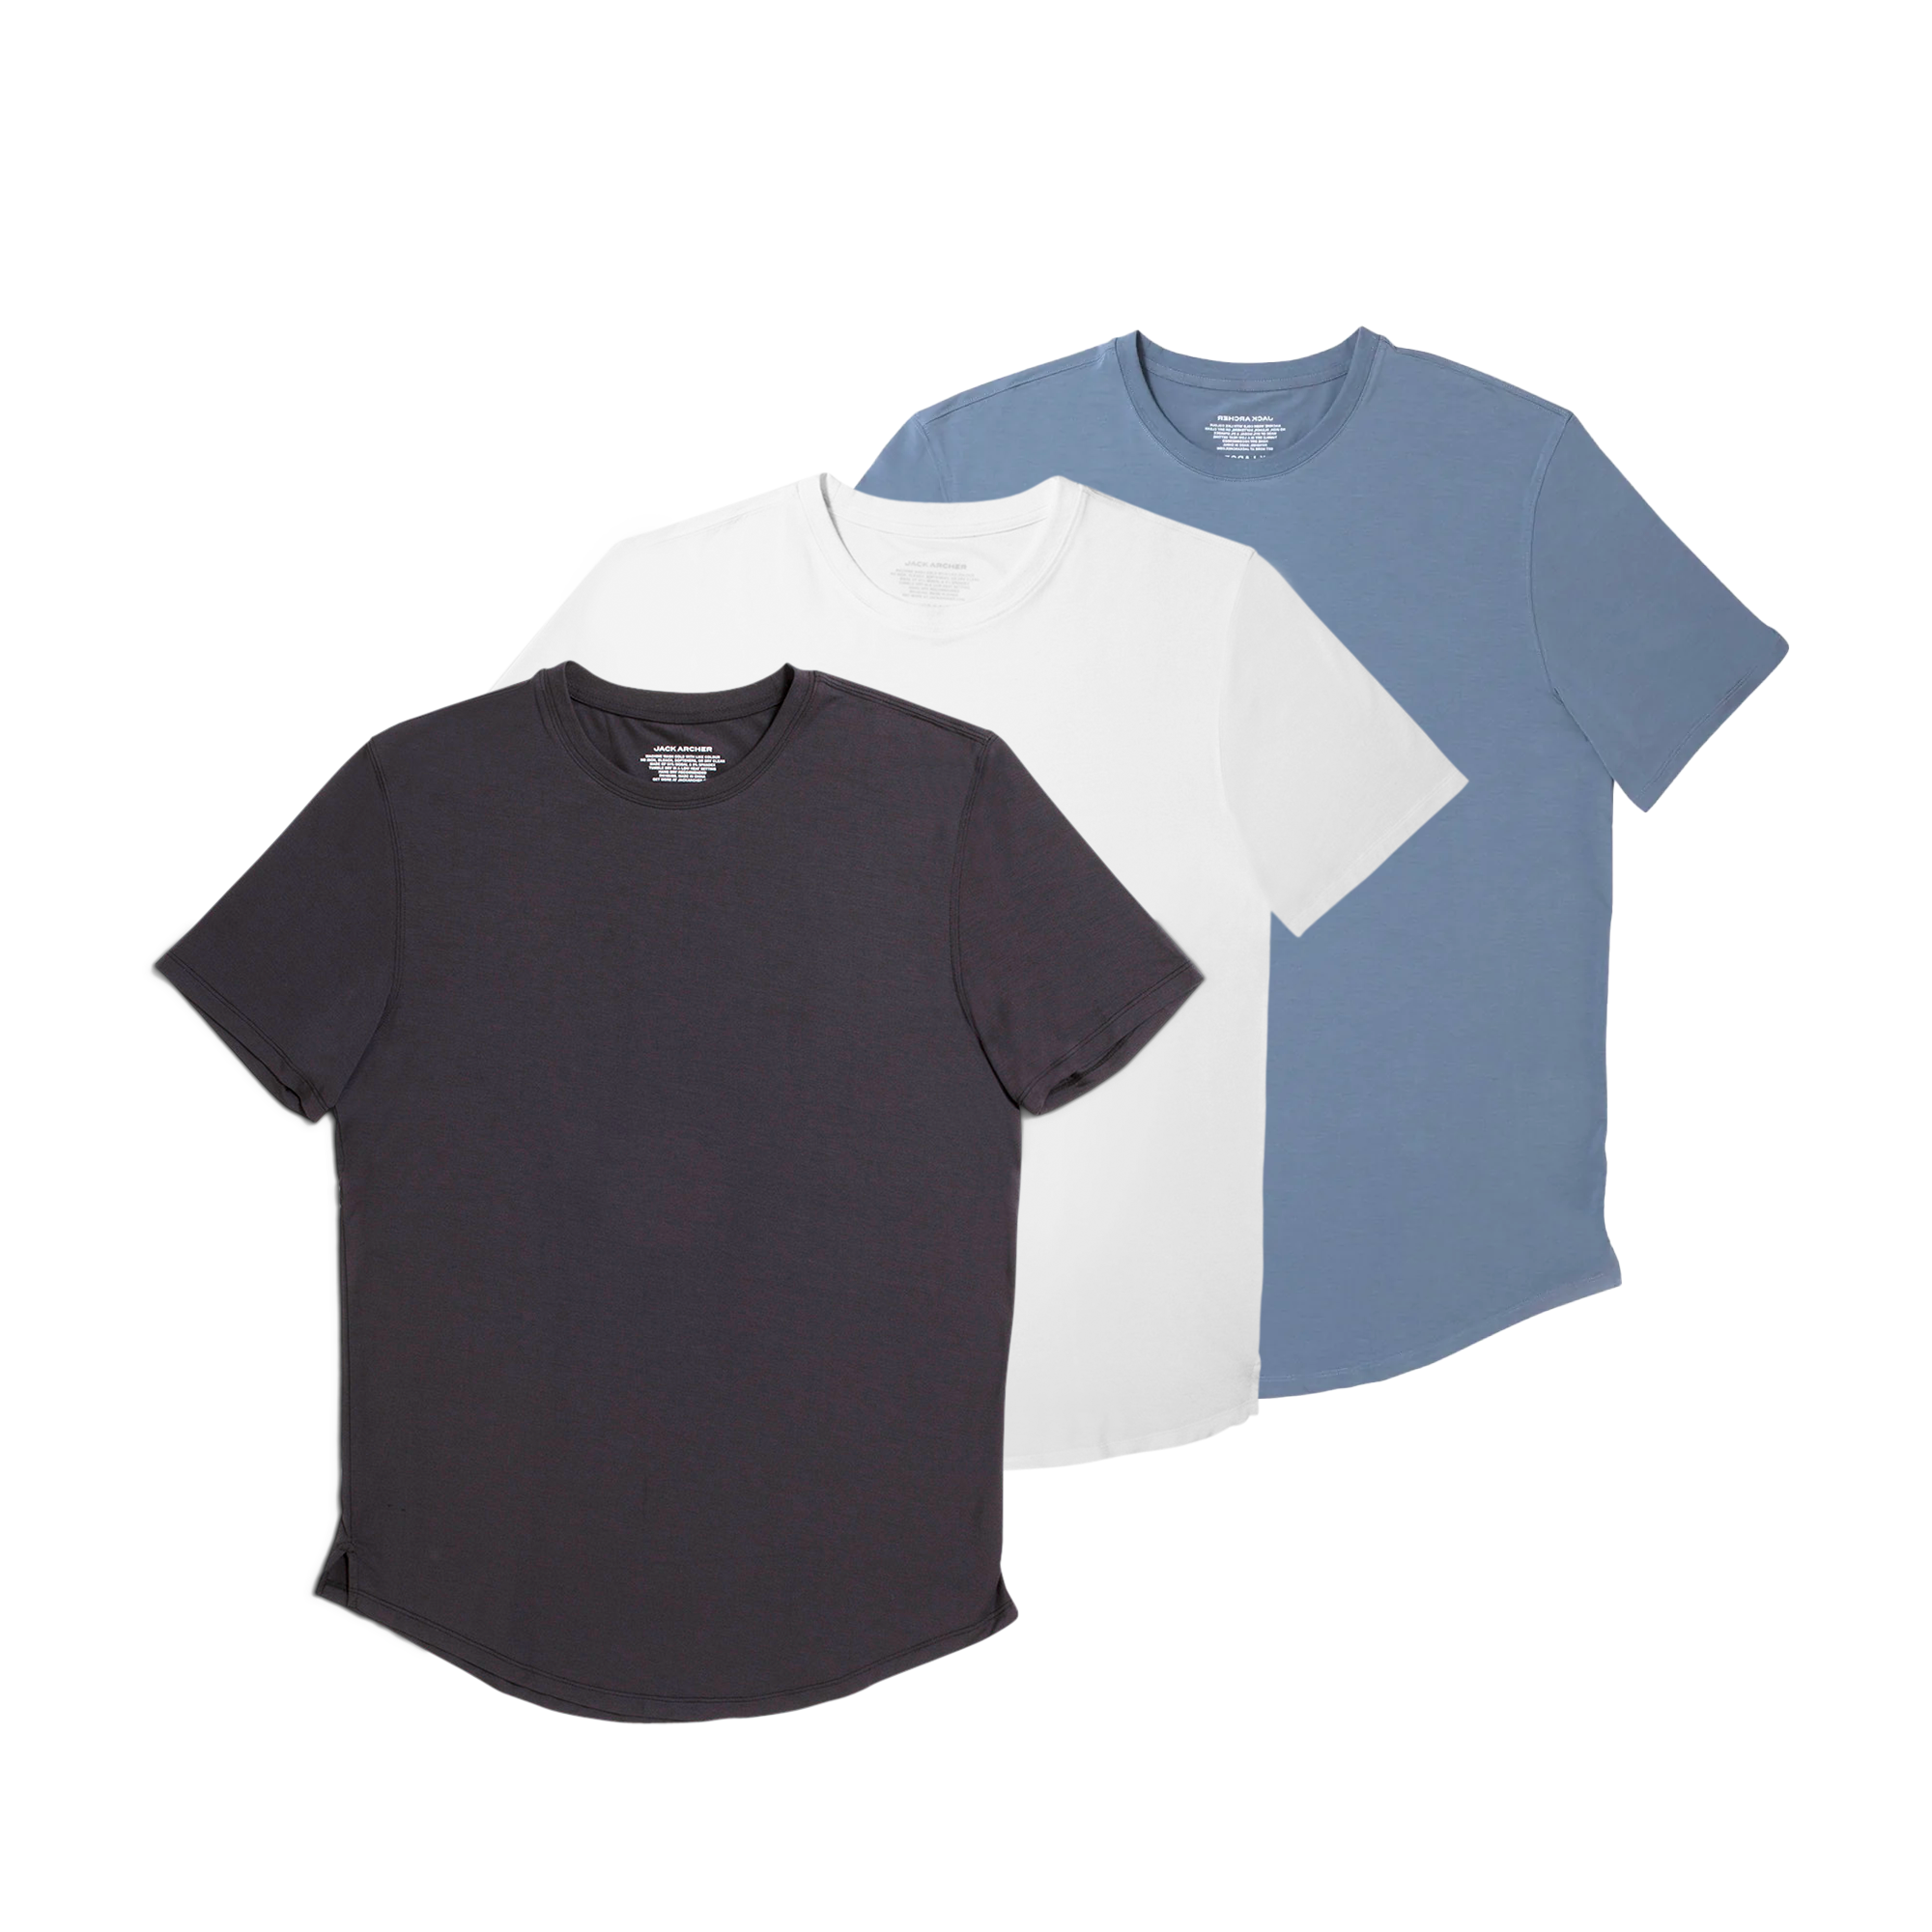 Anytime Tees, 3-Pack